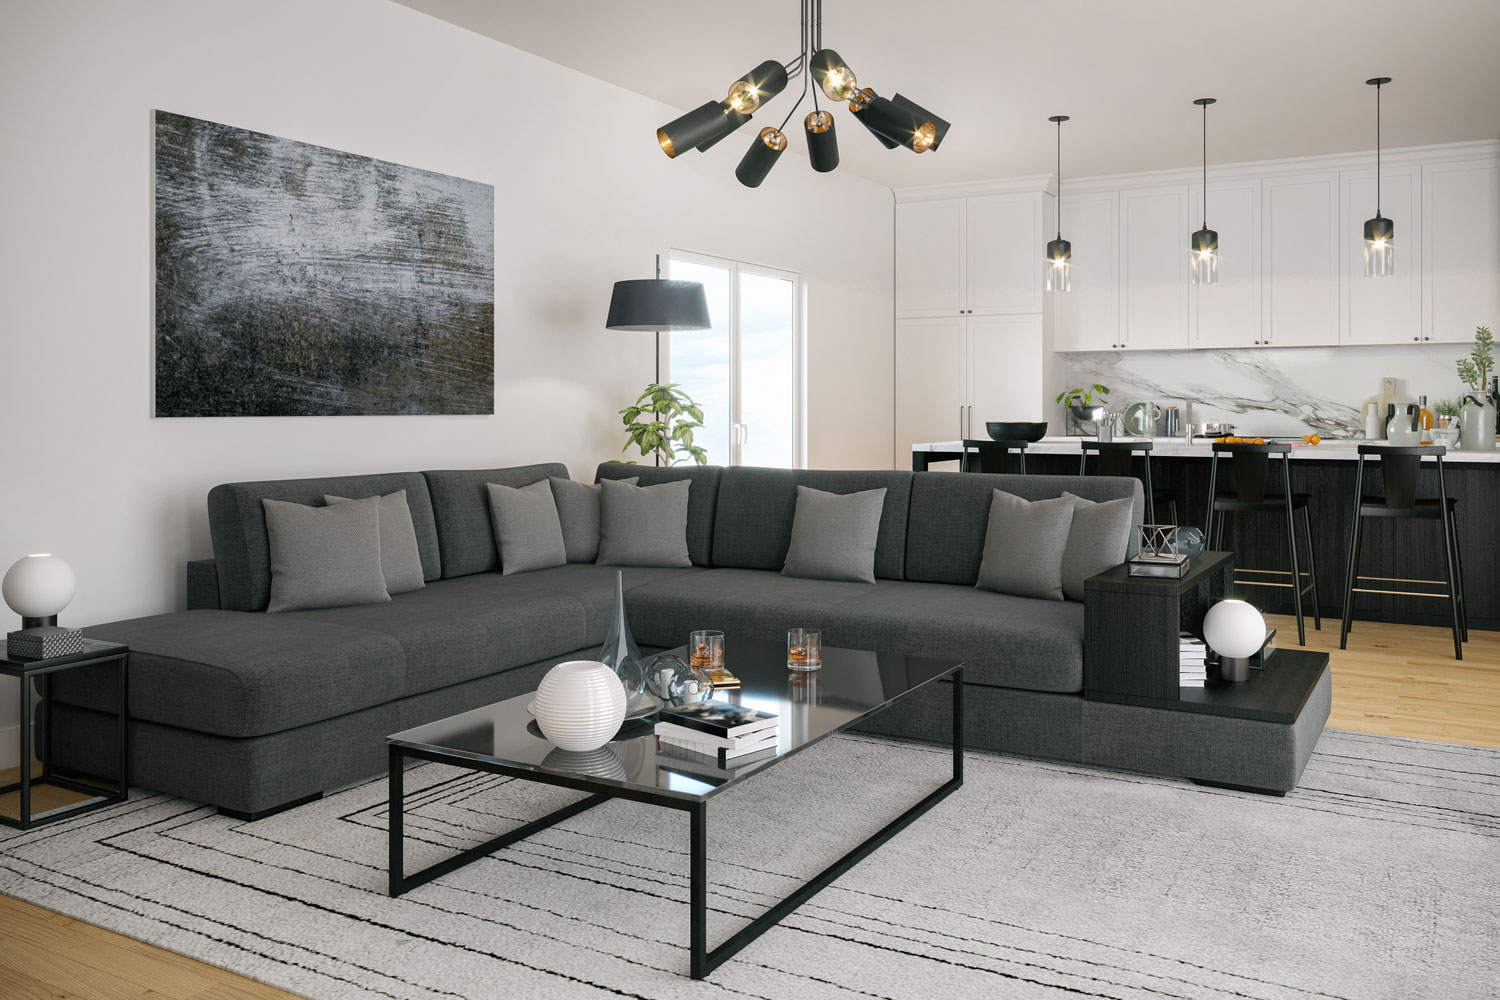 A long black sectional leather sofa with gray throw pillows inside modern contemporary living room